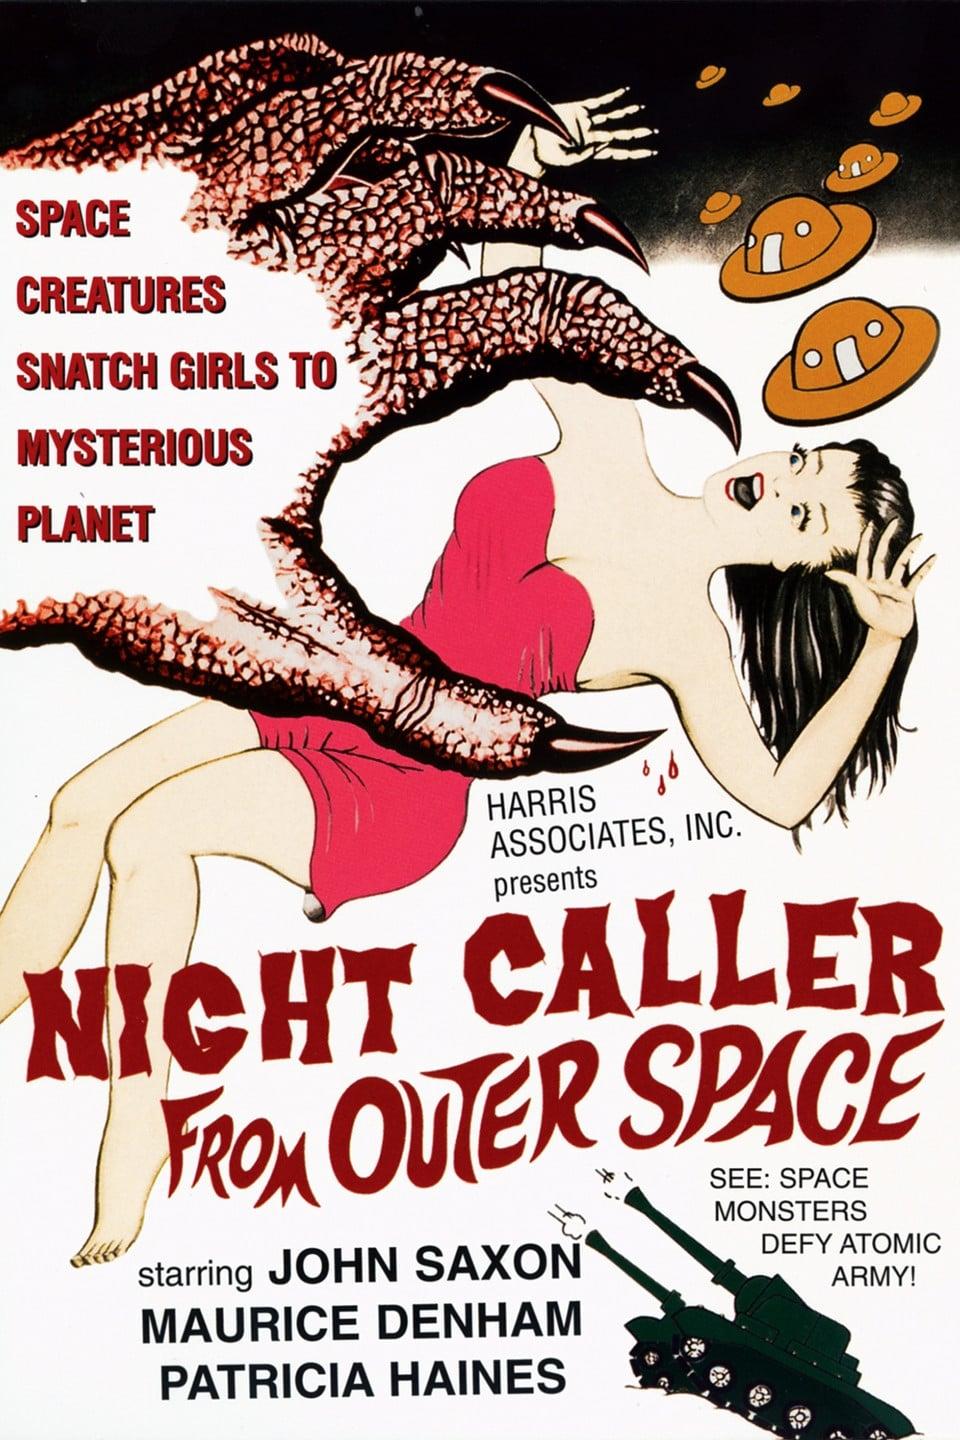 The Night Caller poster